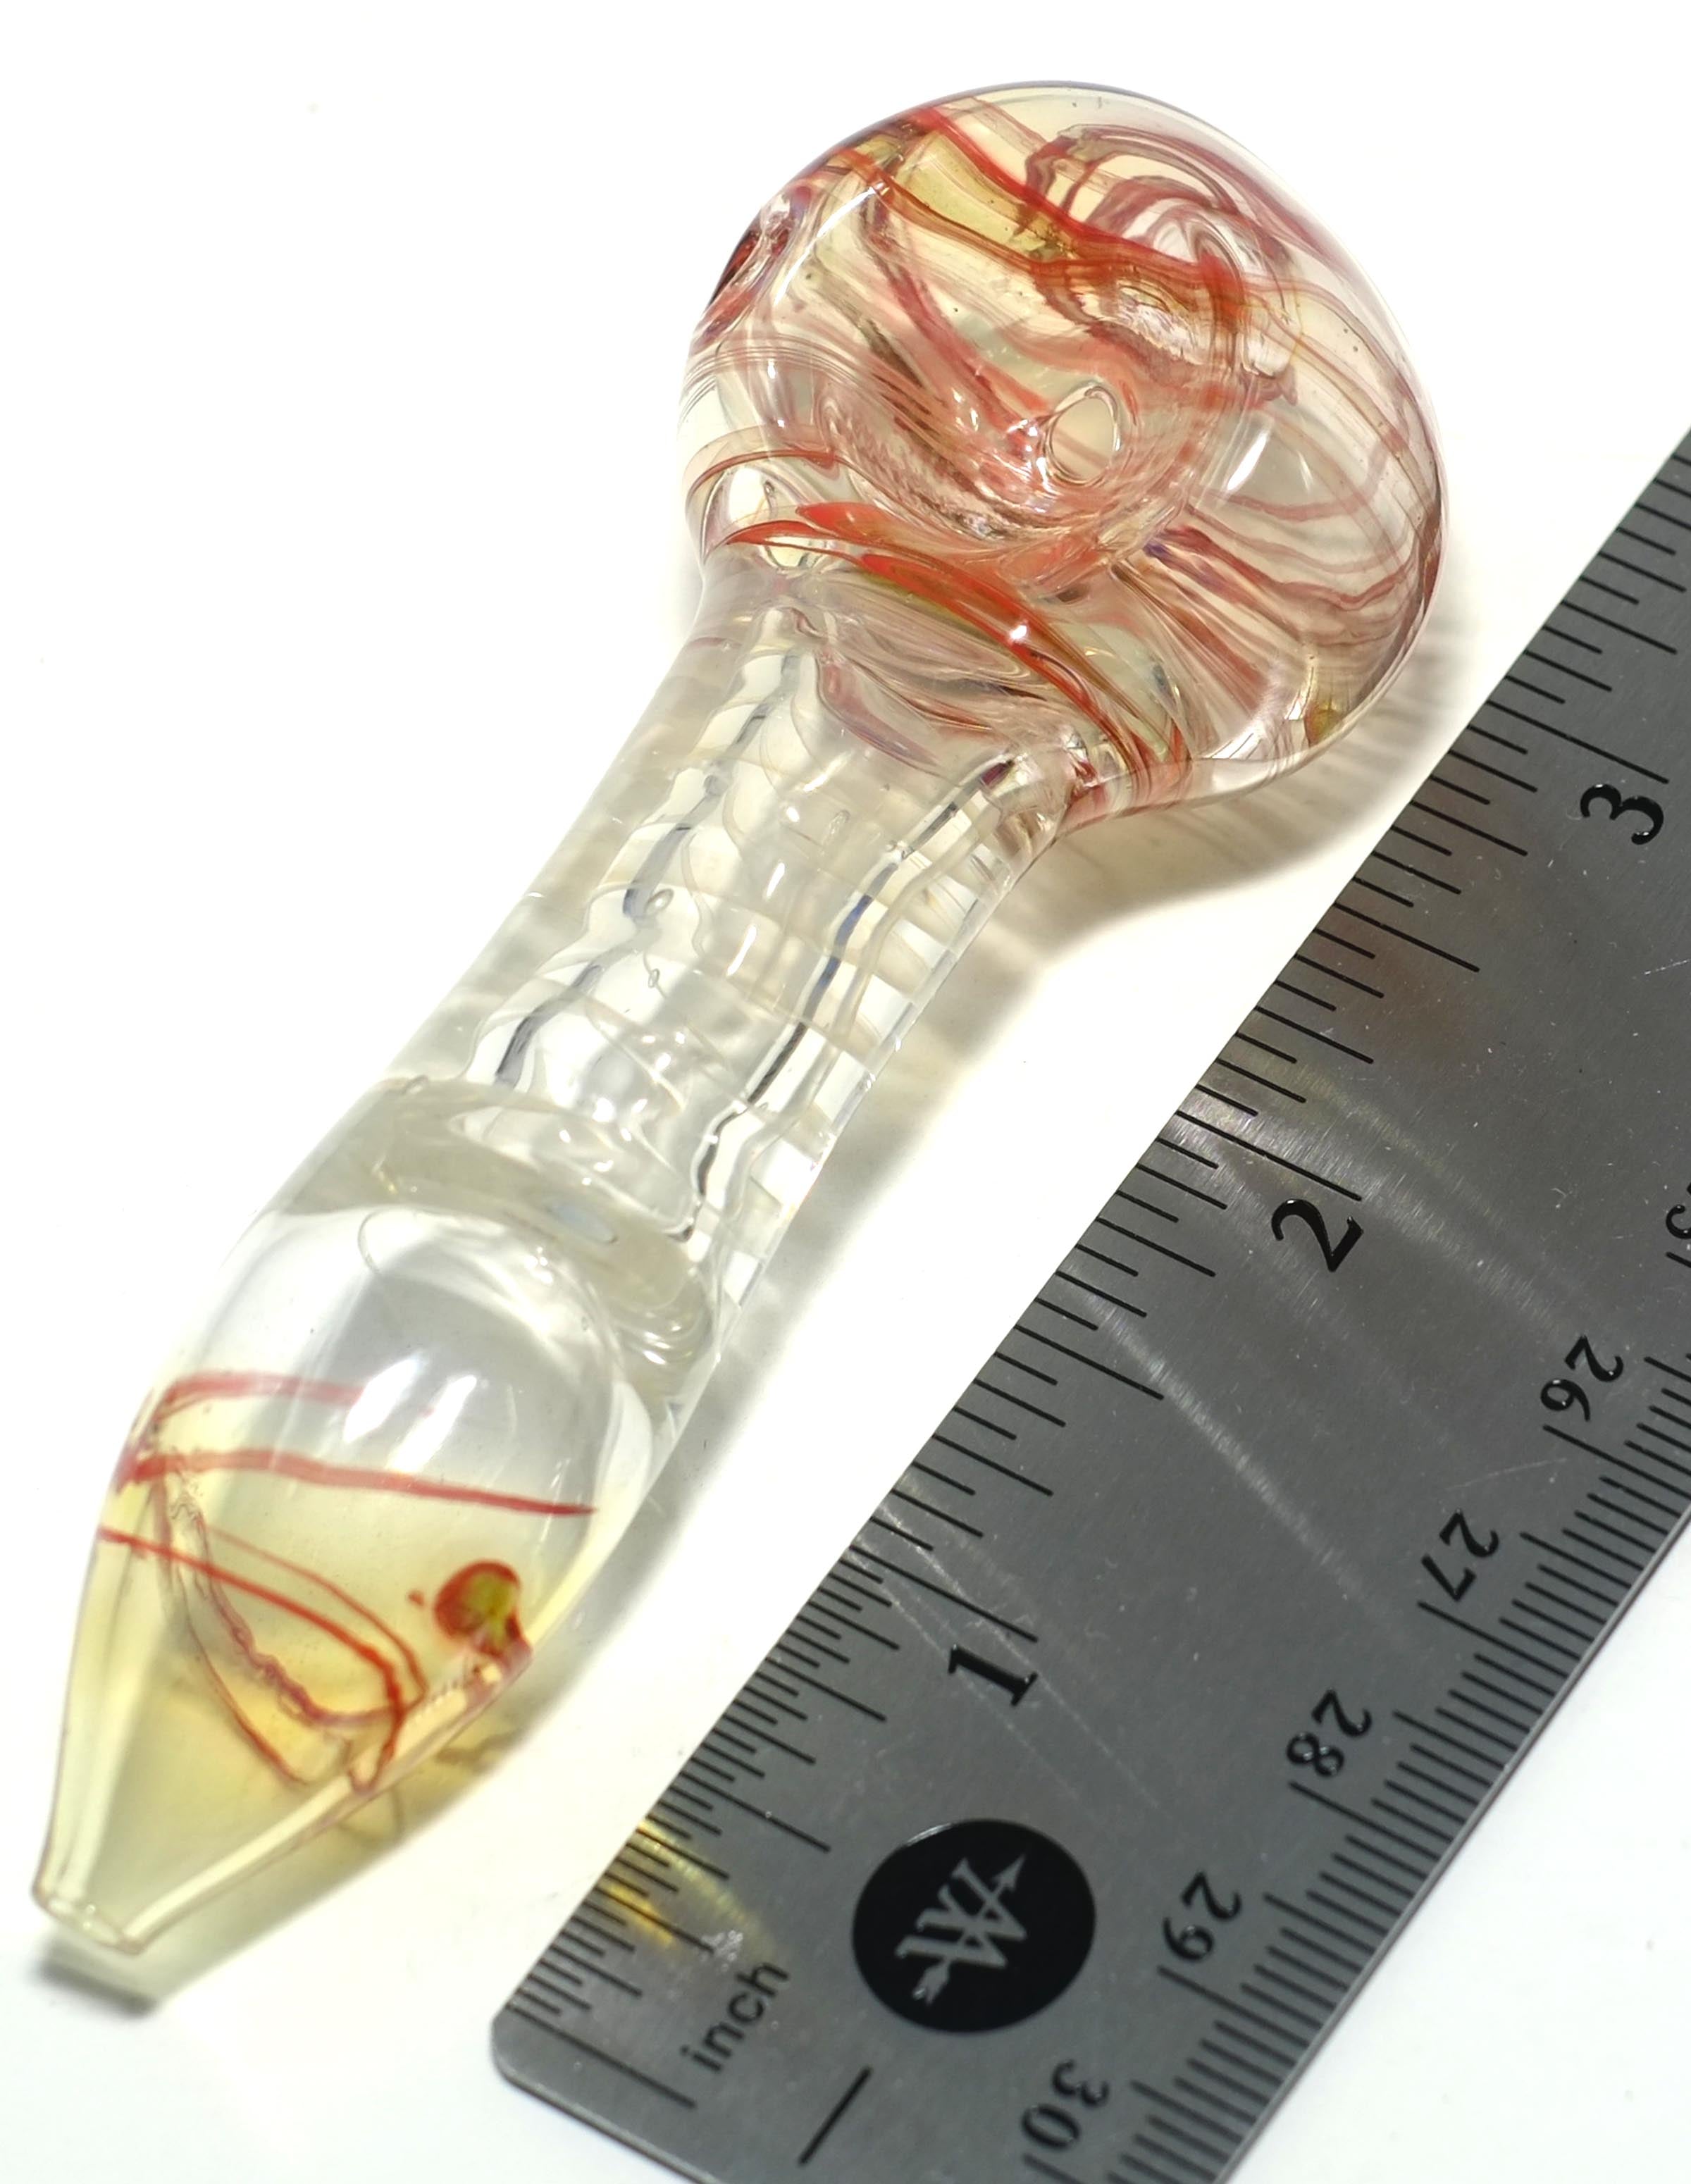 3.5" Spiral Glass Hand Pipe Assorted Color